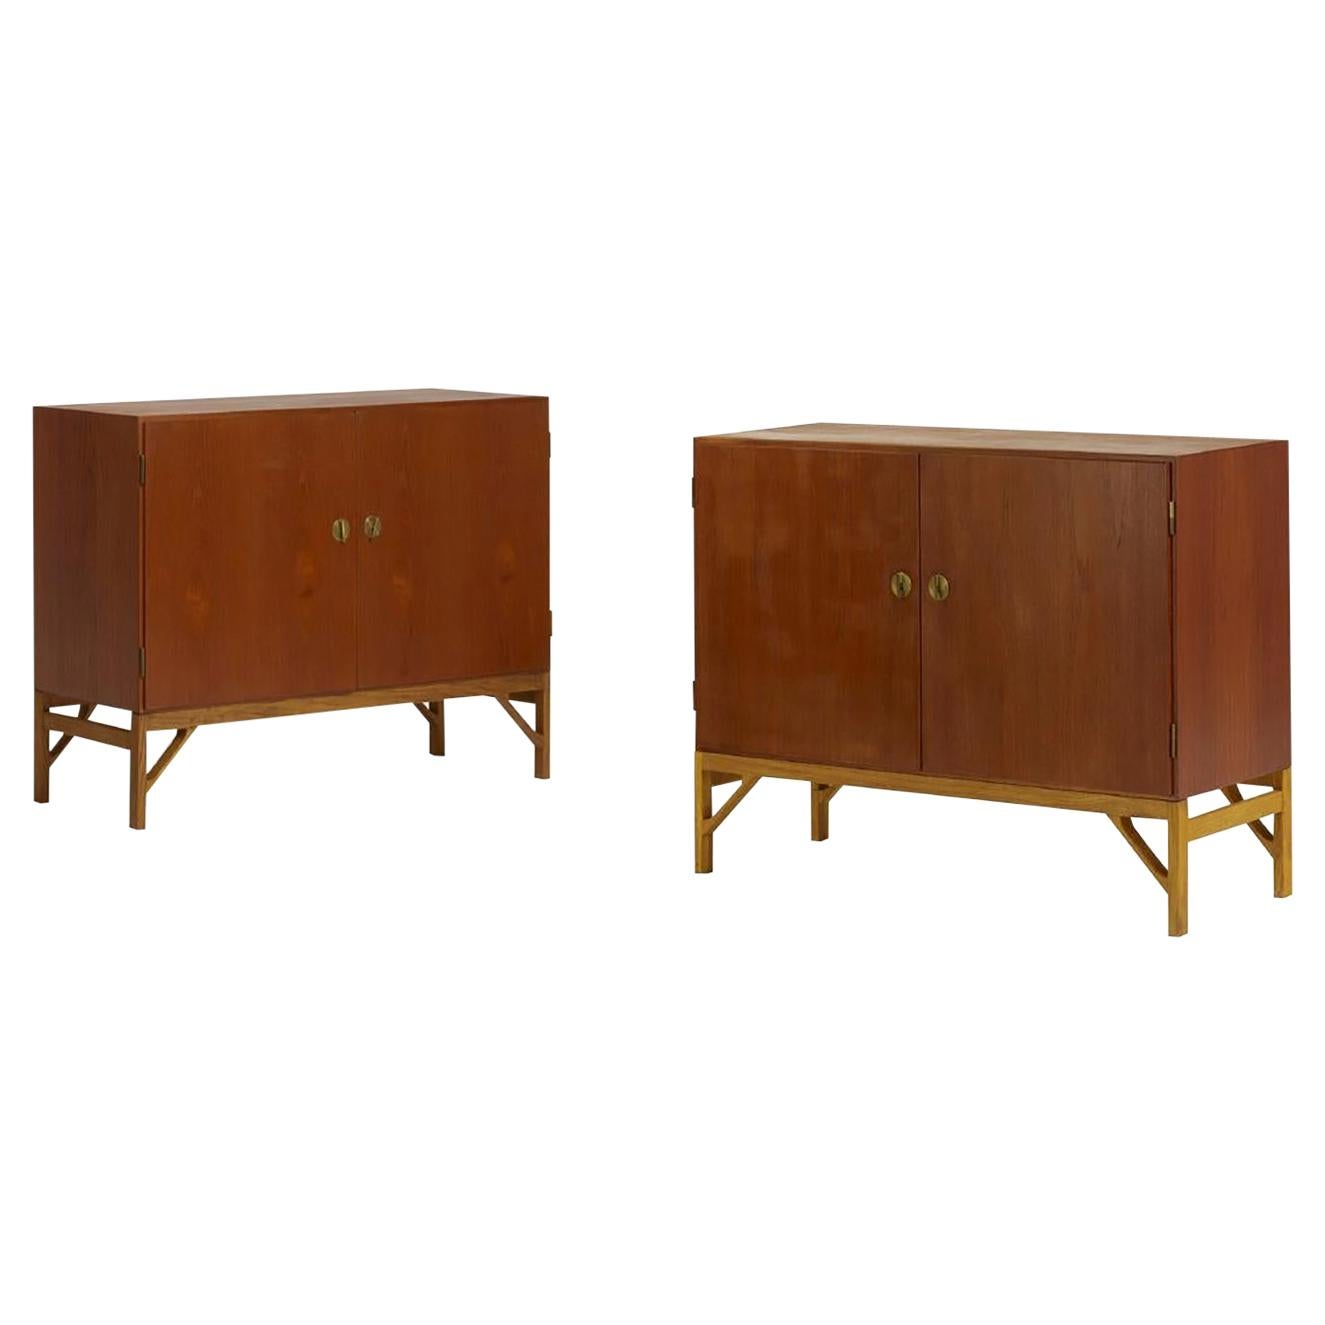 Pair of Teak, Oak and Brass Cabinets Designed by Borge Mogensen